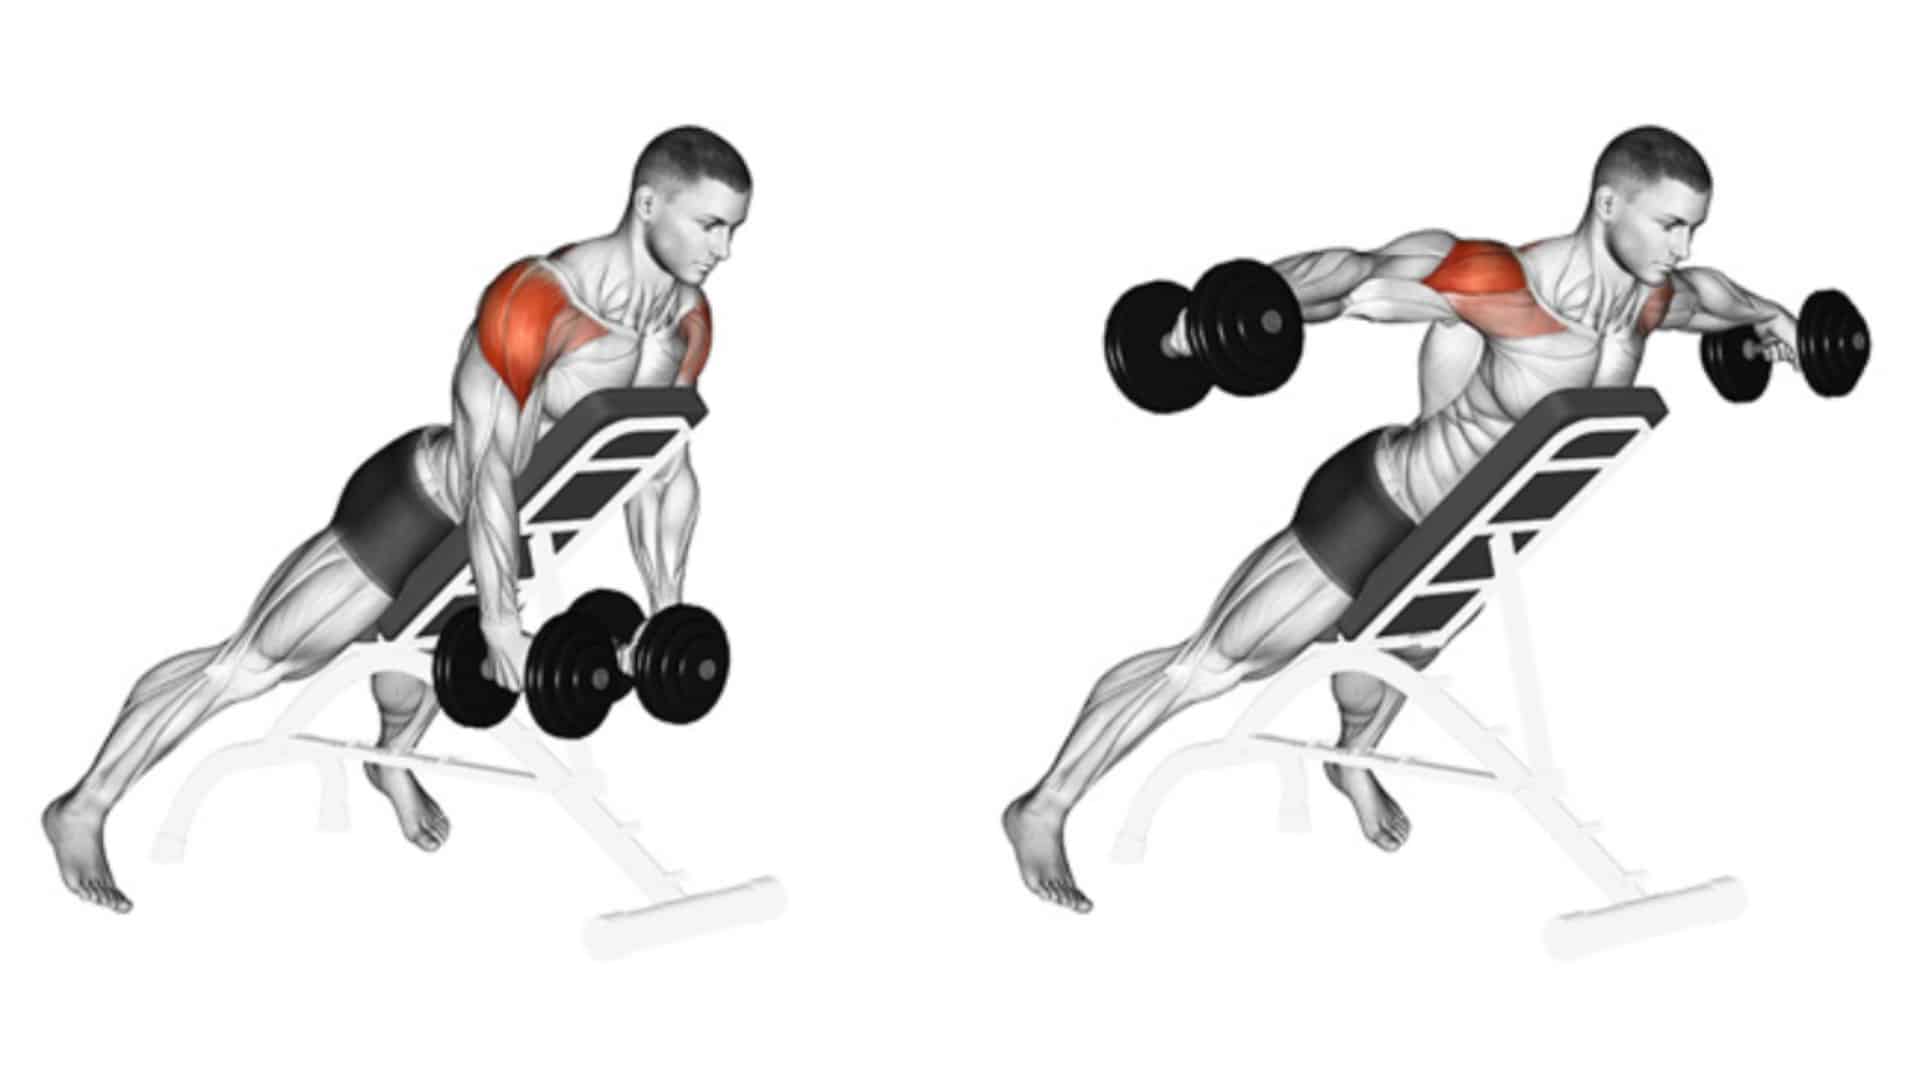 Incline Bench Rear Lateral Raise